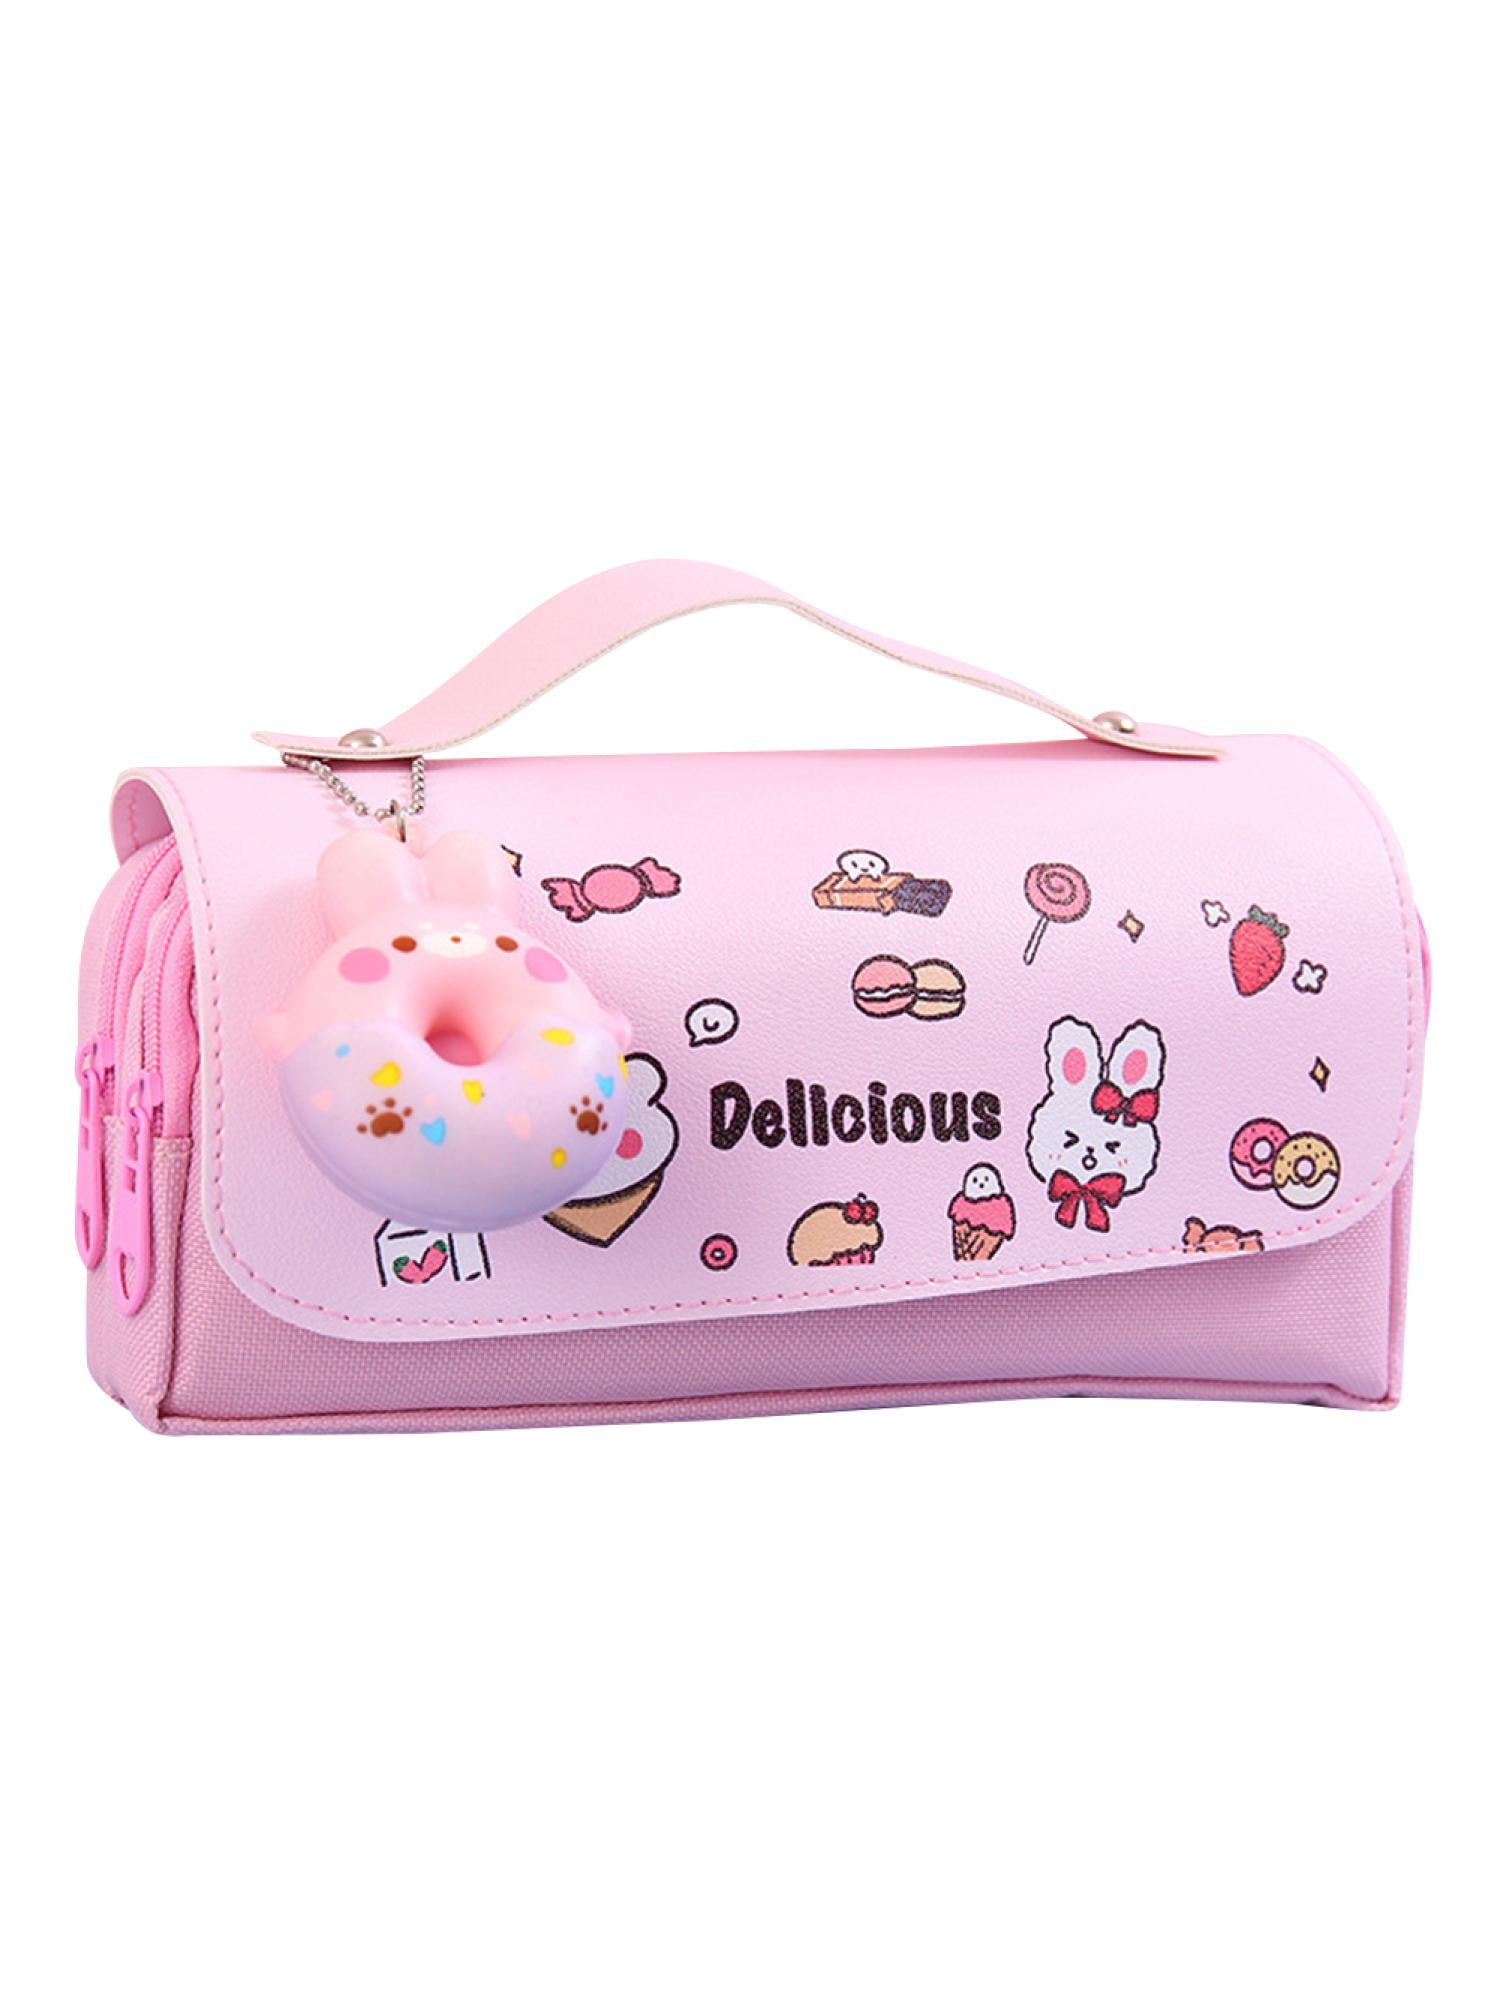 Kawaii Pencil Case Cute Pouch Large Capacity Pen Storage Bag Decompression  Creative Korean Stationery School Supplies for Girls